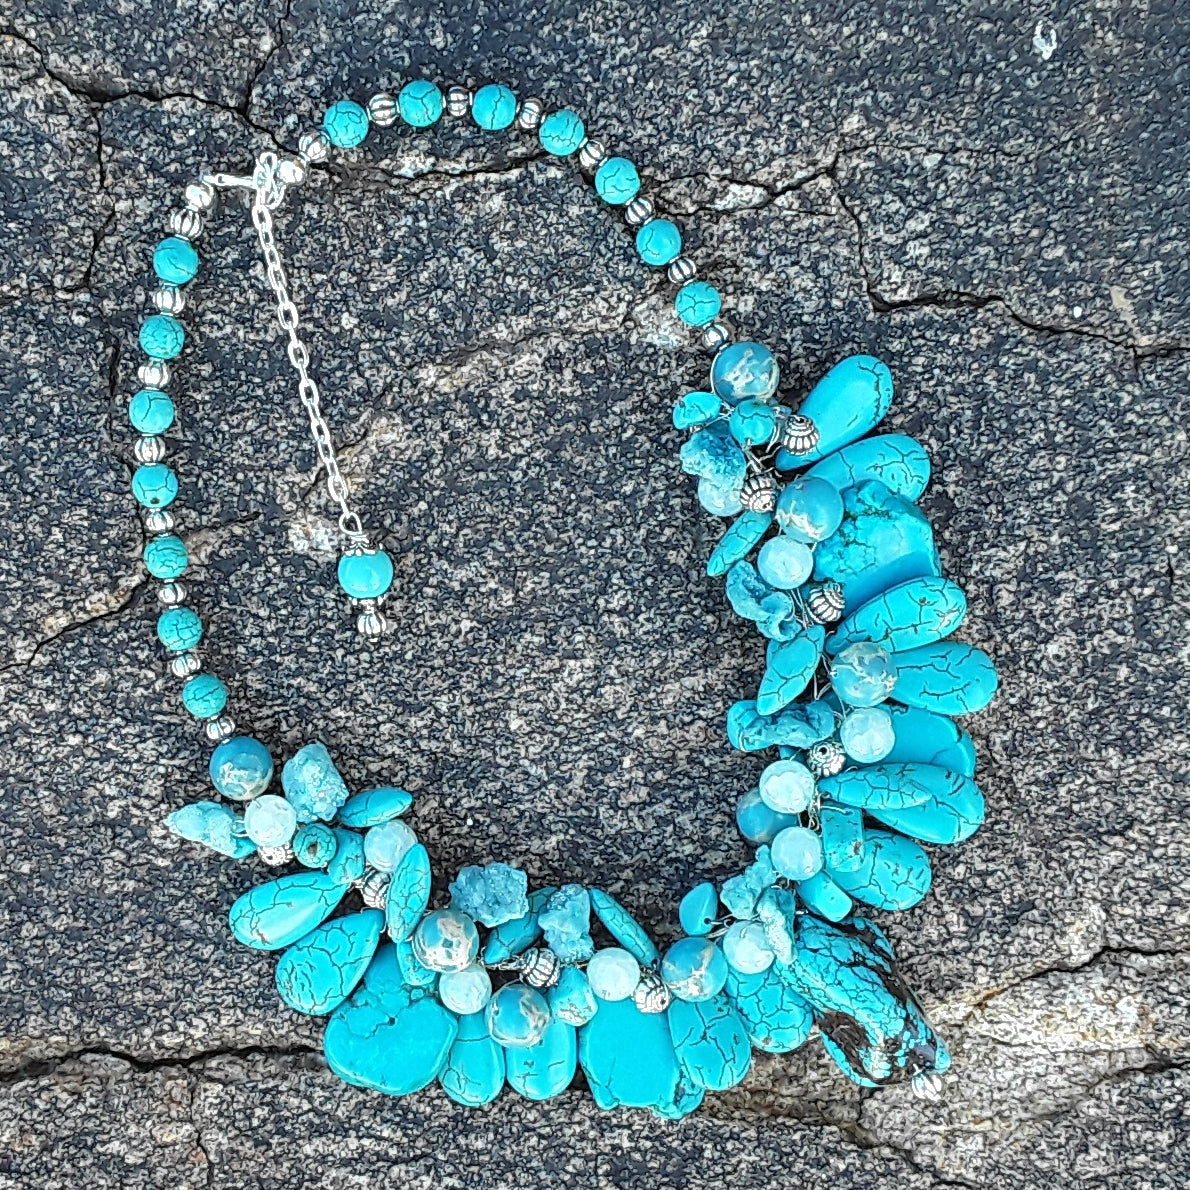 Chunky turquoise necklace | Chunky turquoise necklace, Turquoise necklace,  Womens jewelry necklace